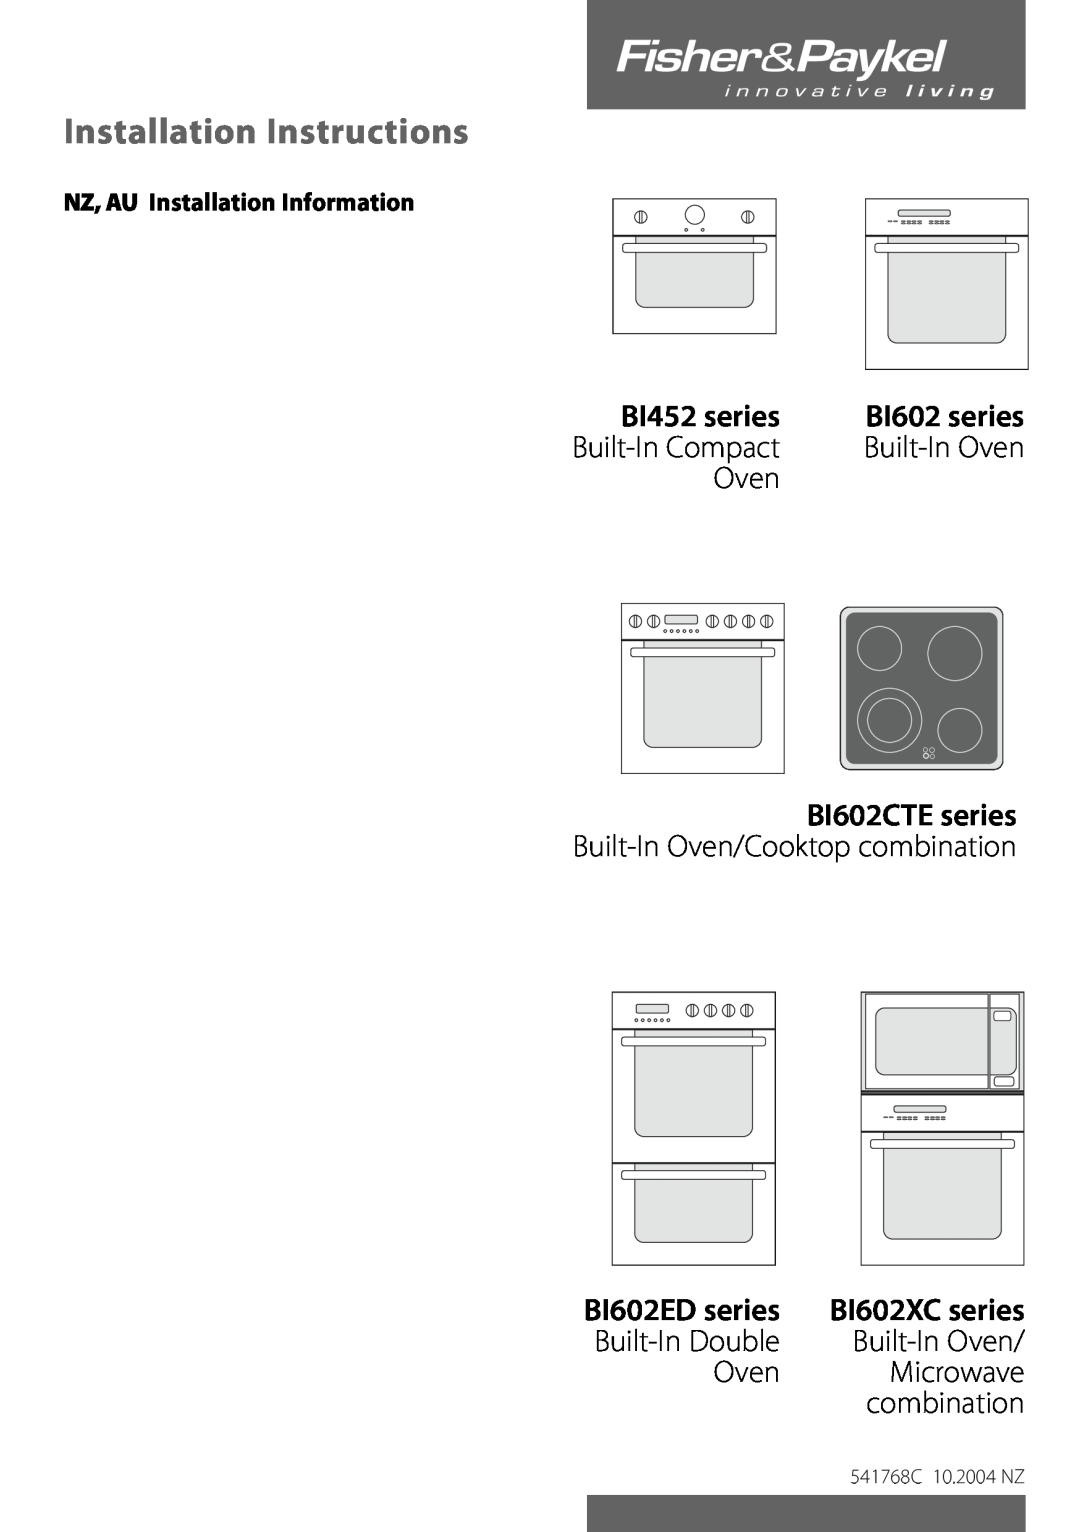 Fisher & Paykel installation instructions Installation Instructions, BI452 series, BI602 series, BI602CTE series, Oven 